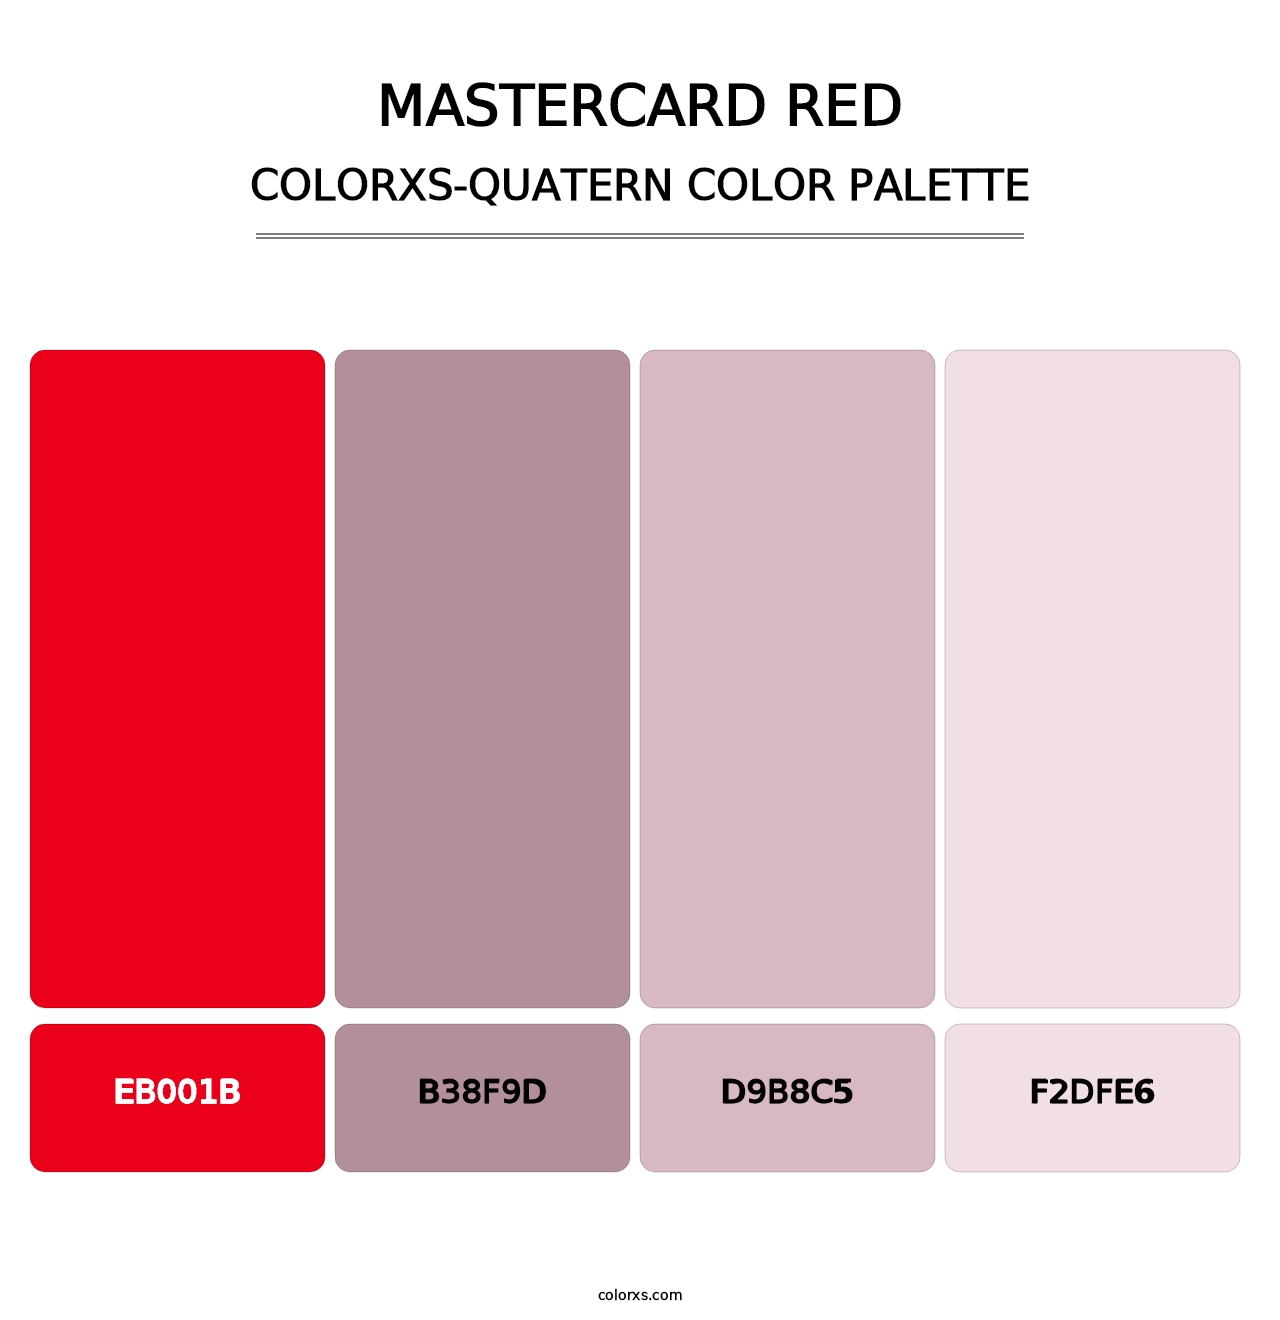 Mastercard Red - Colorxs Quatern Palette